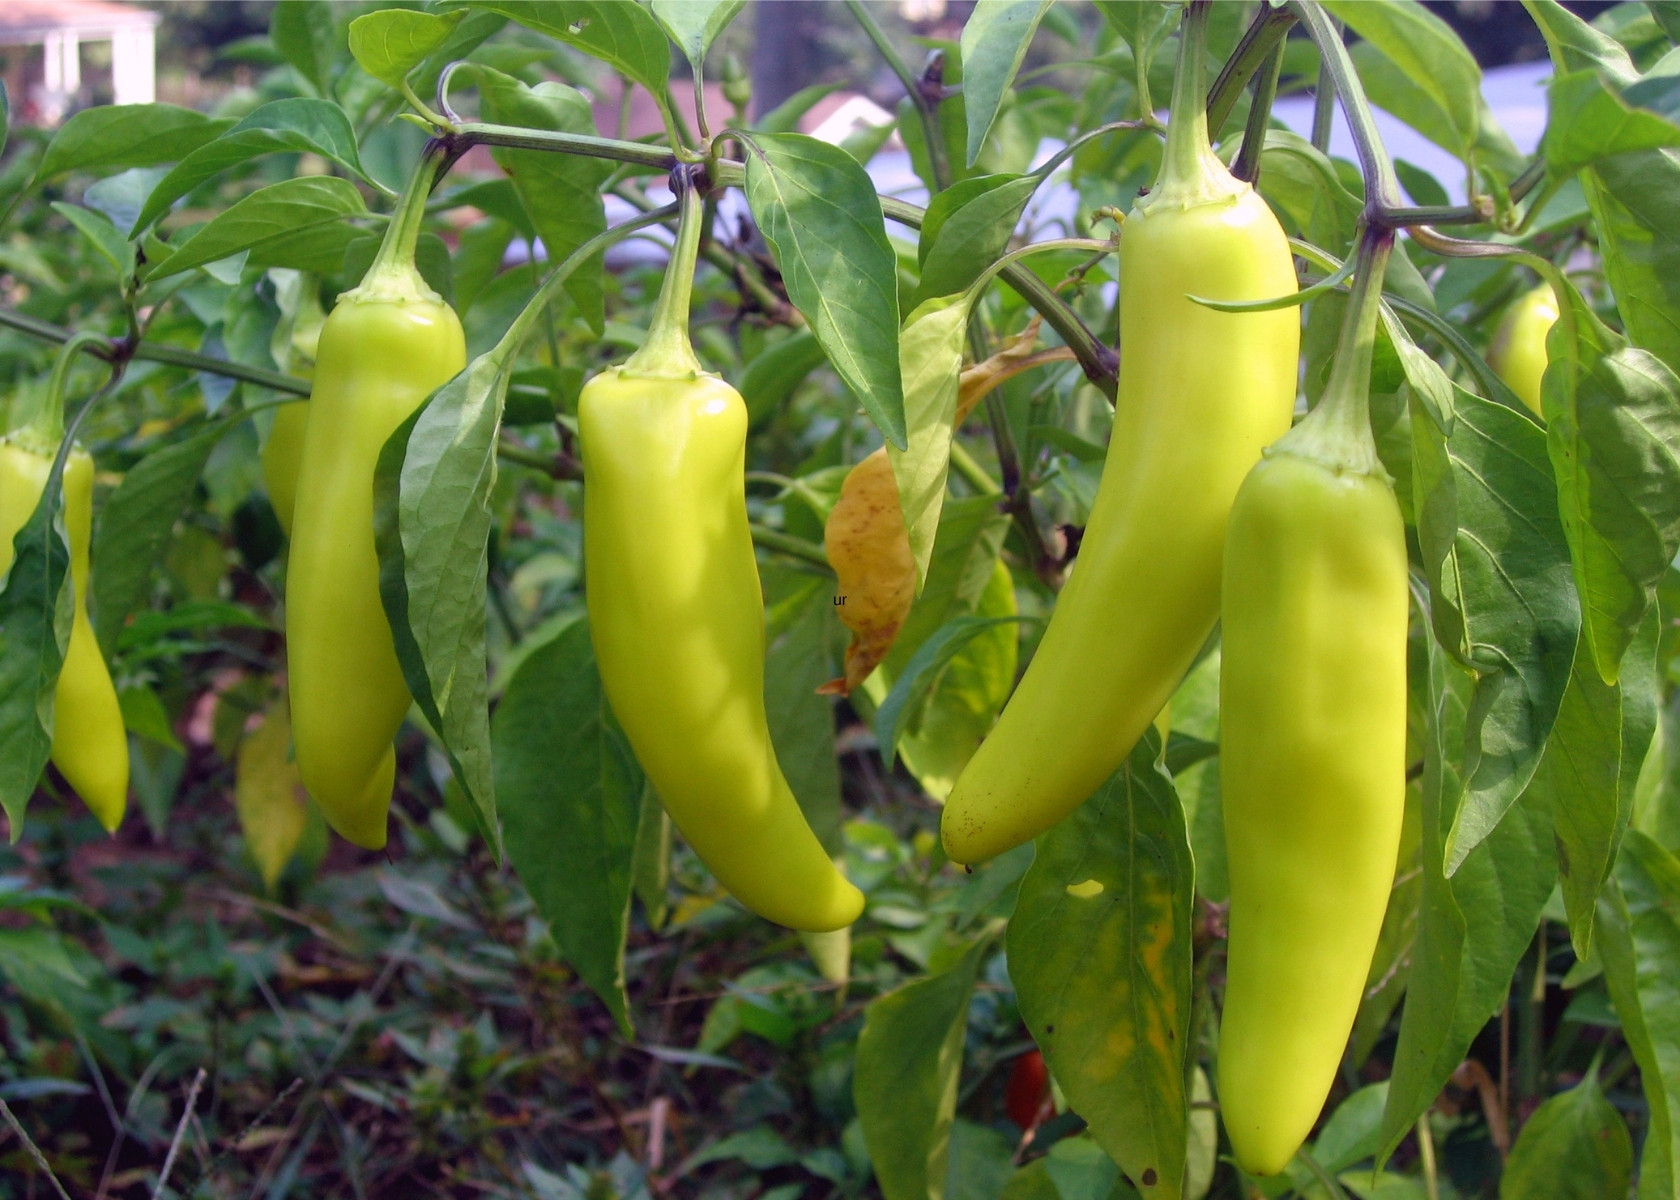 Several bright yellowish green banana peppers growing from bush in garden.